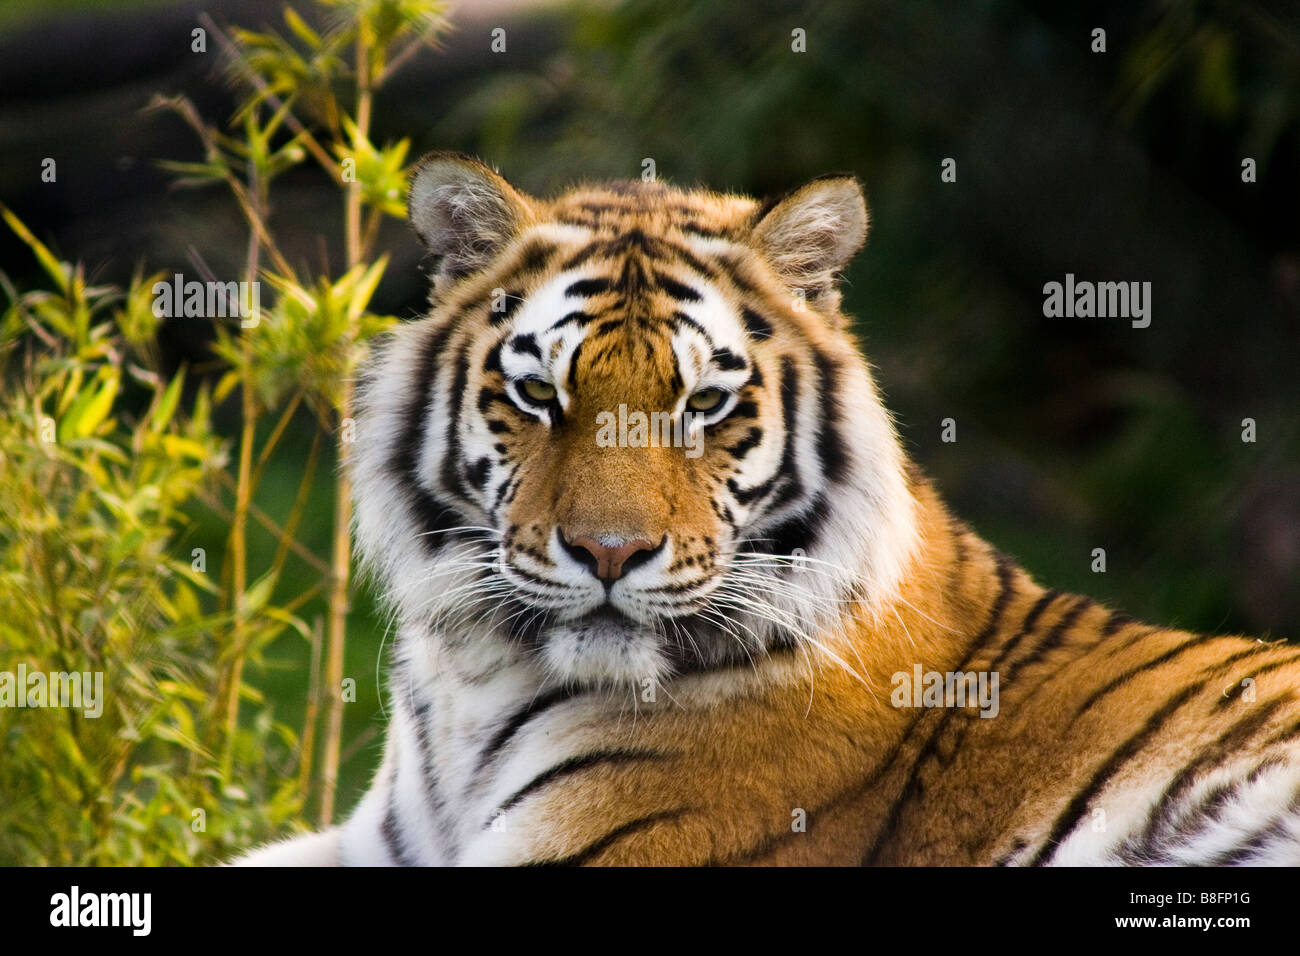 Tiger at Colchester Zoo england uk Stock Photo